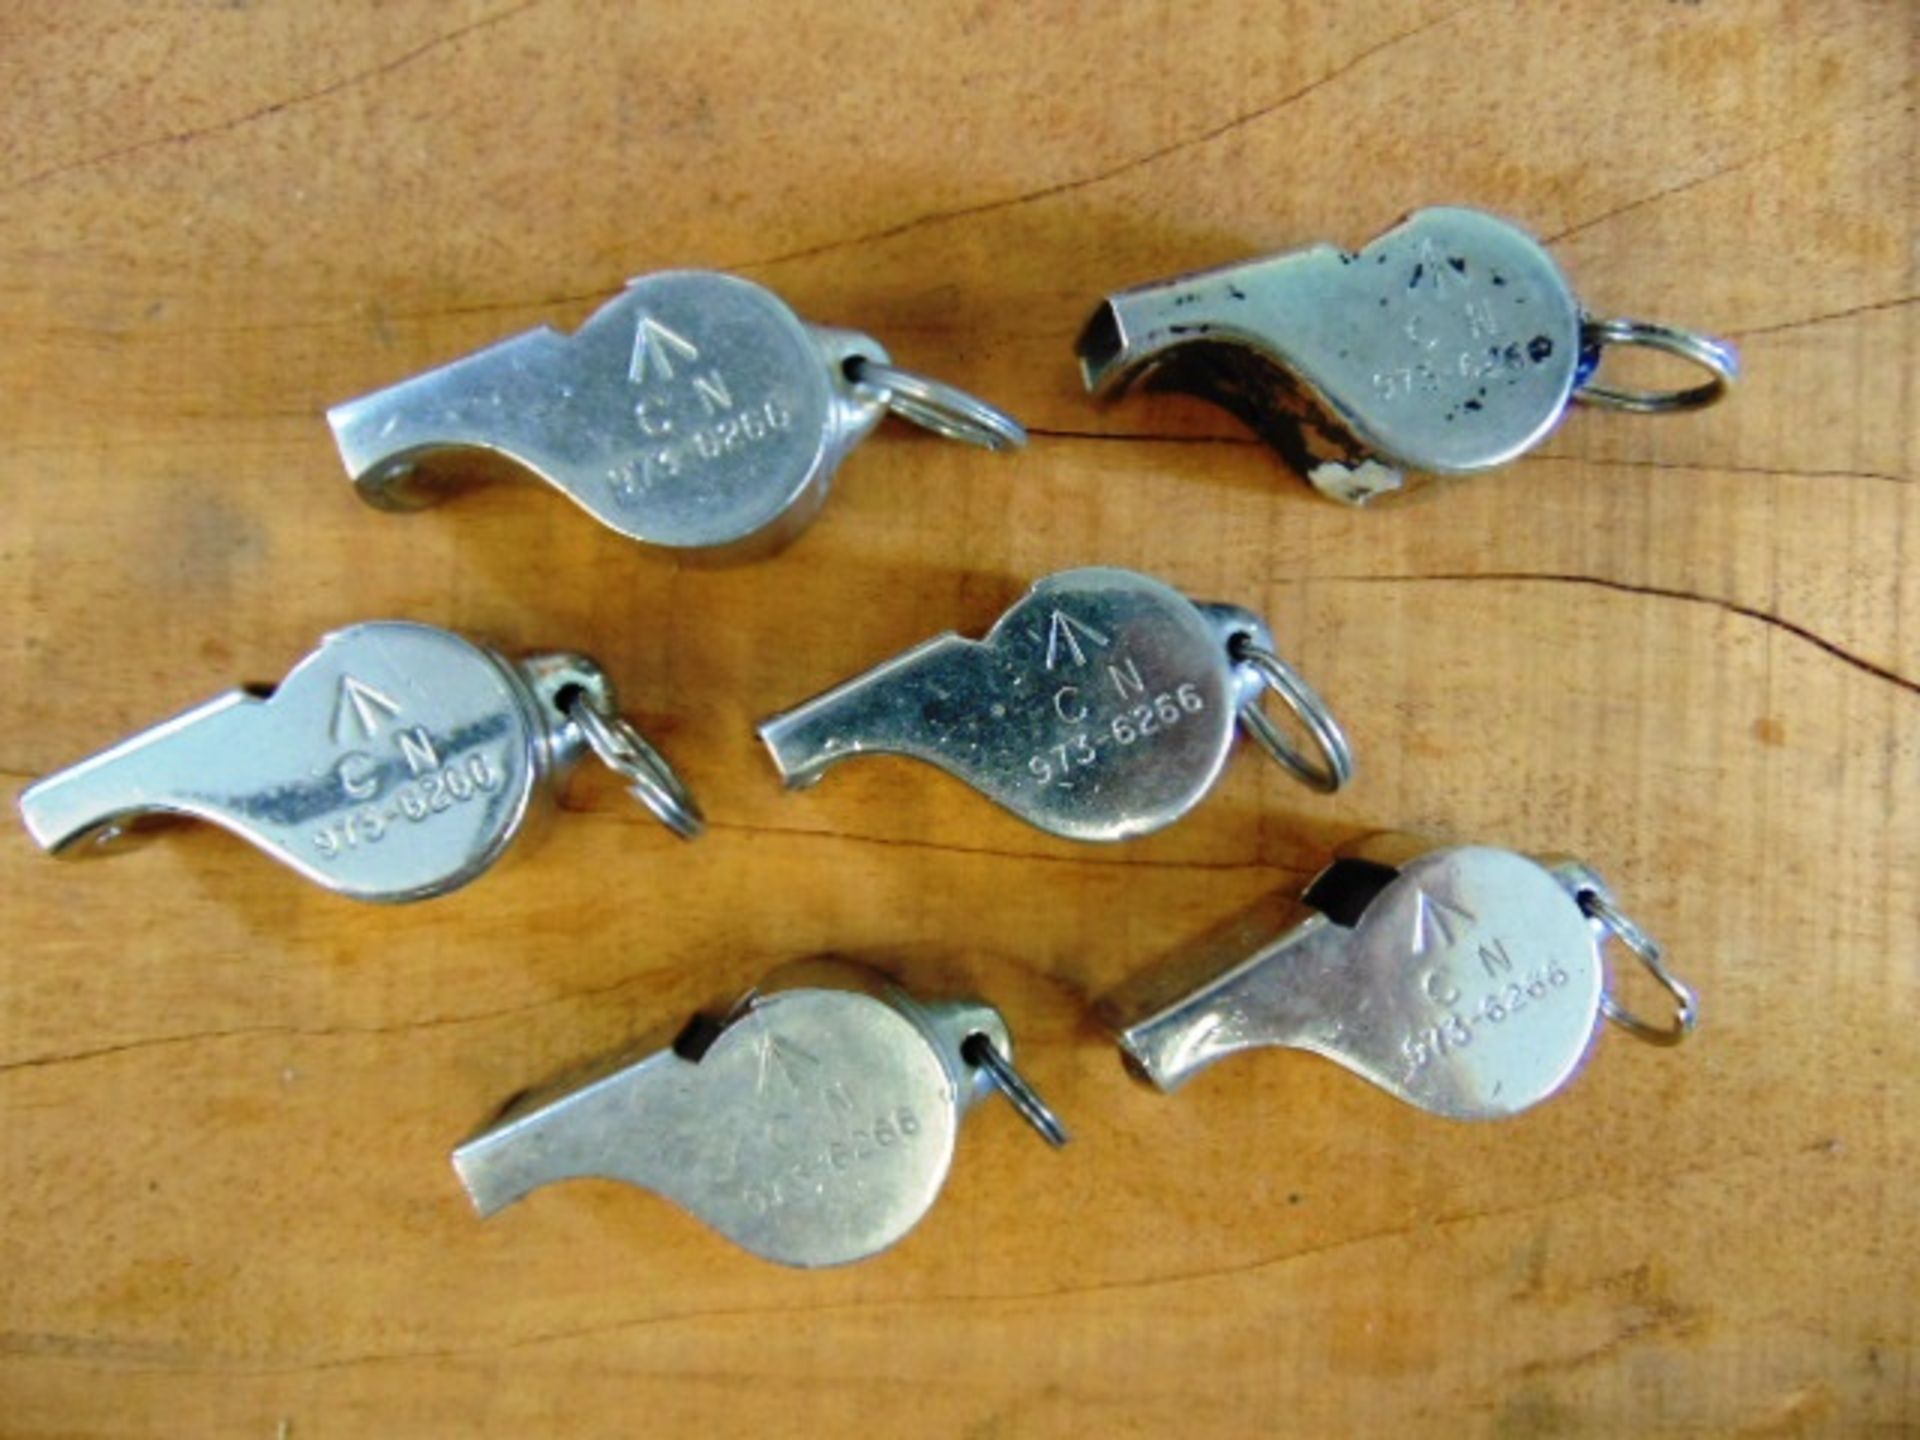 6 x Genuine British Army 'The Acme Thunderer' Military Whistles - Image 3 of 5